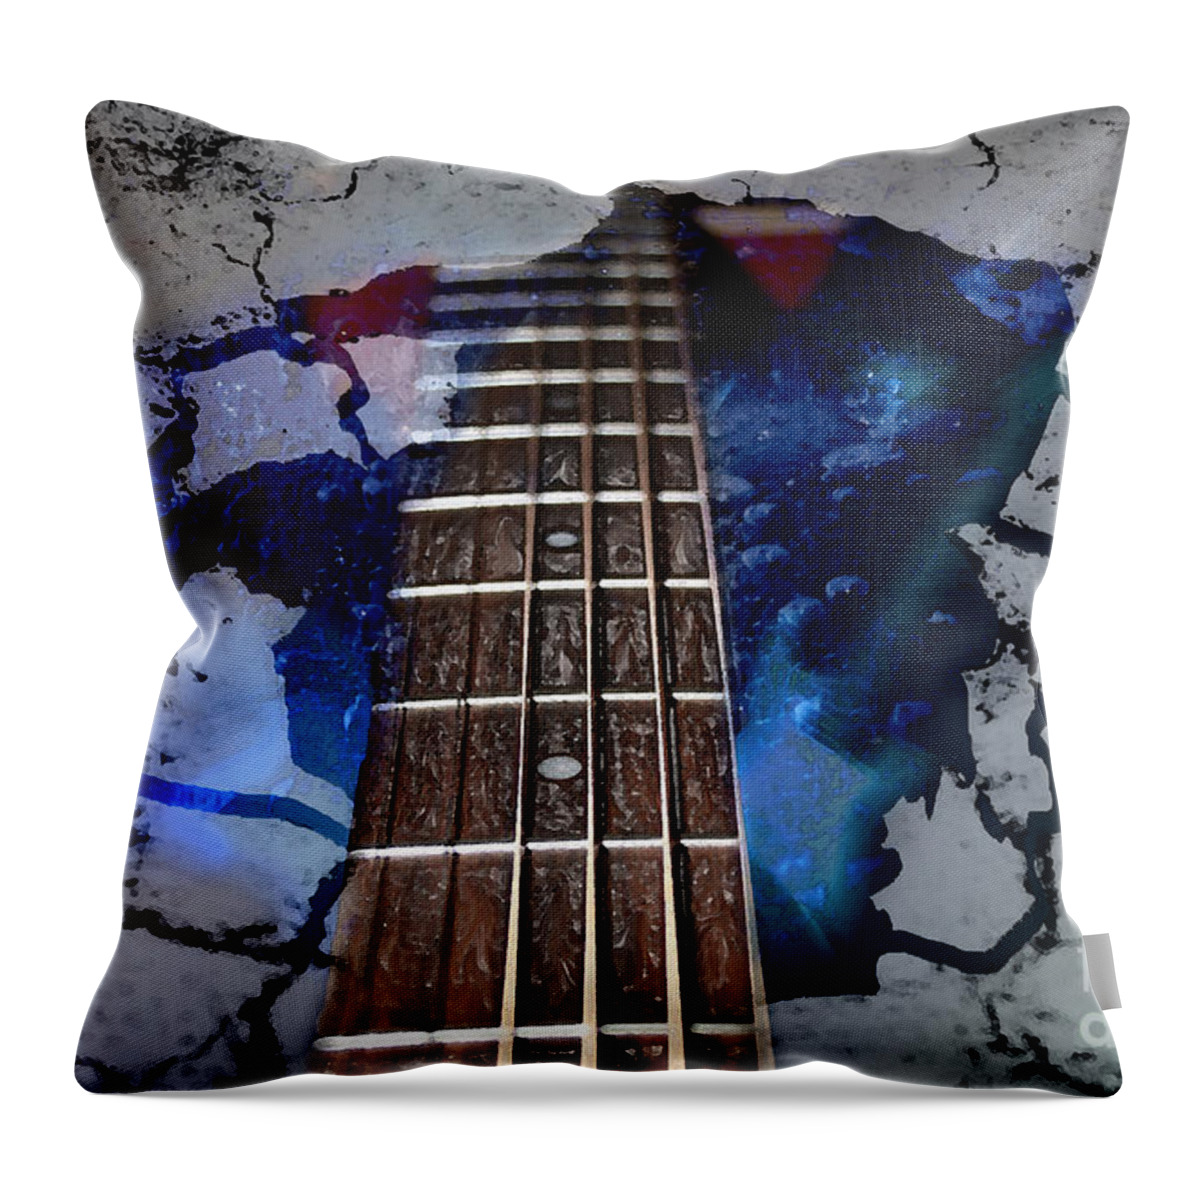 Music Throw Pillow featuring the digital art Thawing The Ice Age by Cathy Beharriell